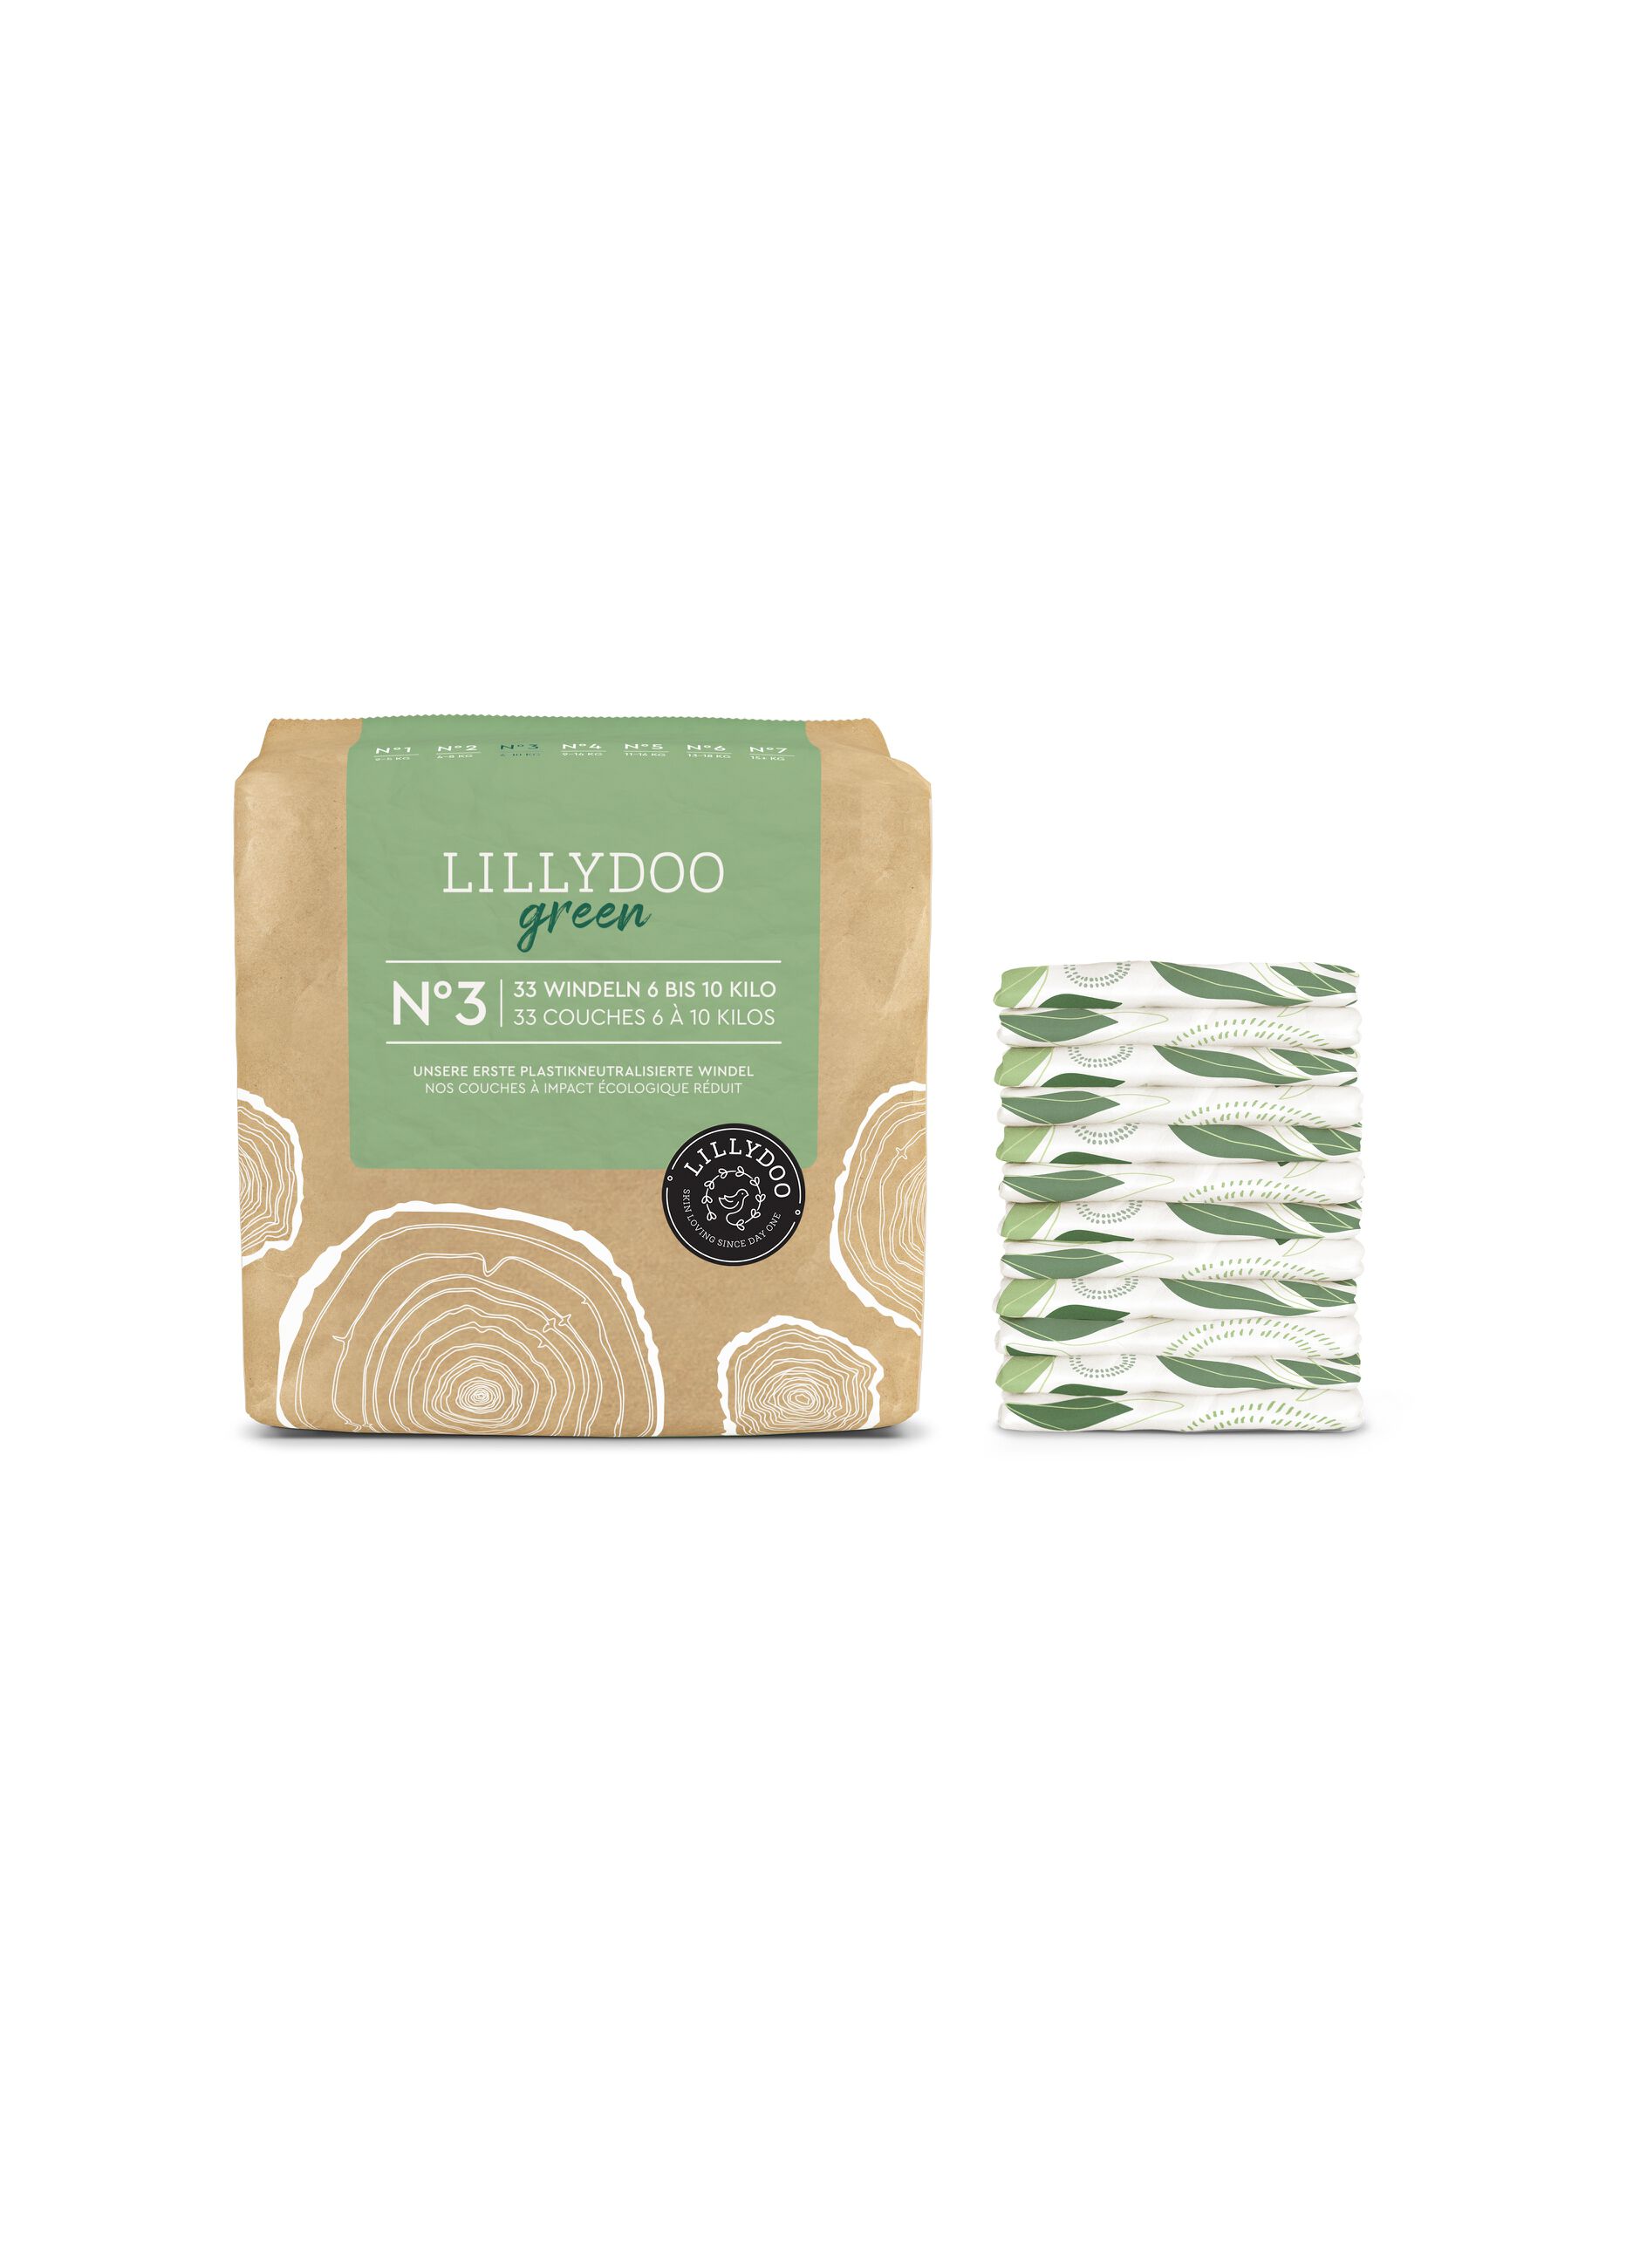 Pañales ecosostenibles N° 3 (6-10 kg) Lillydoo